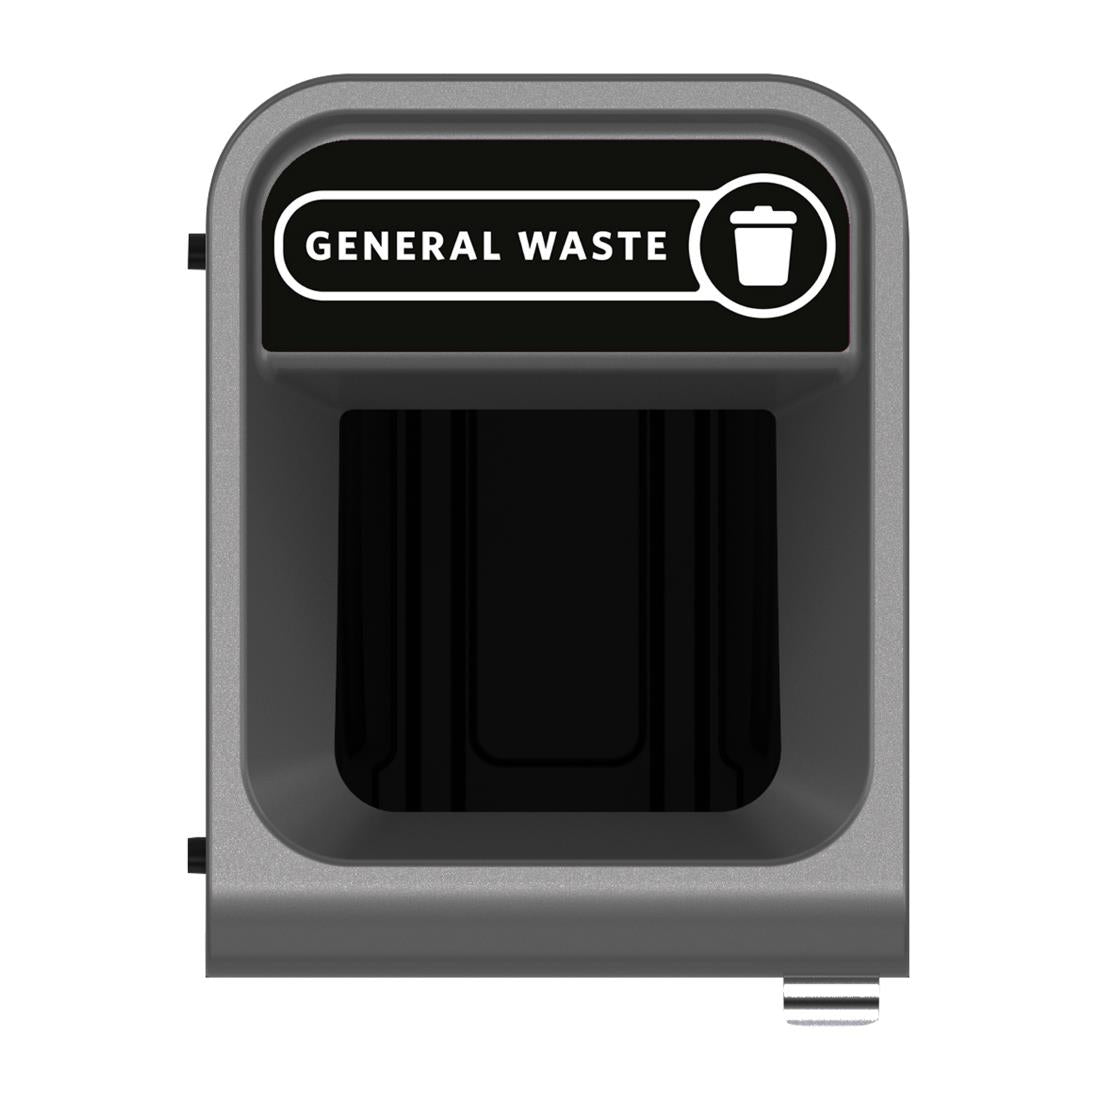 CX978 Rubbermaid Configure Recycling Bin with General Waste Label Black 57L JD Catering Equipment Solutions Ltd